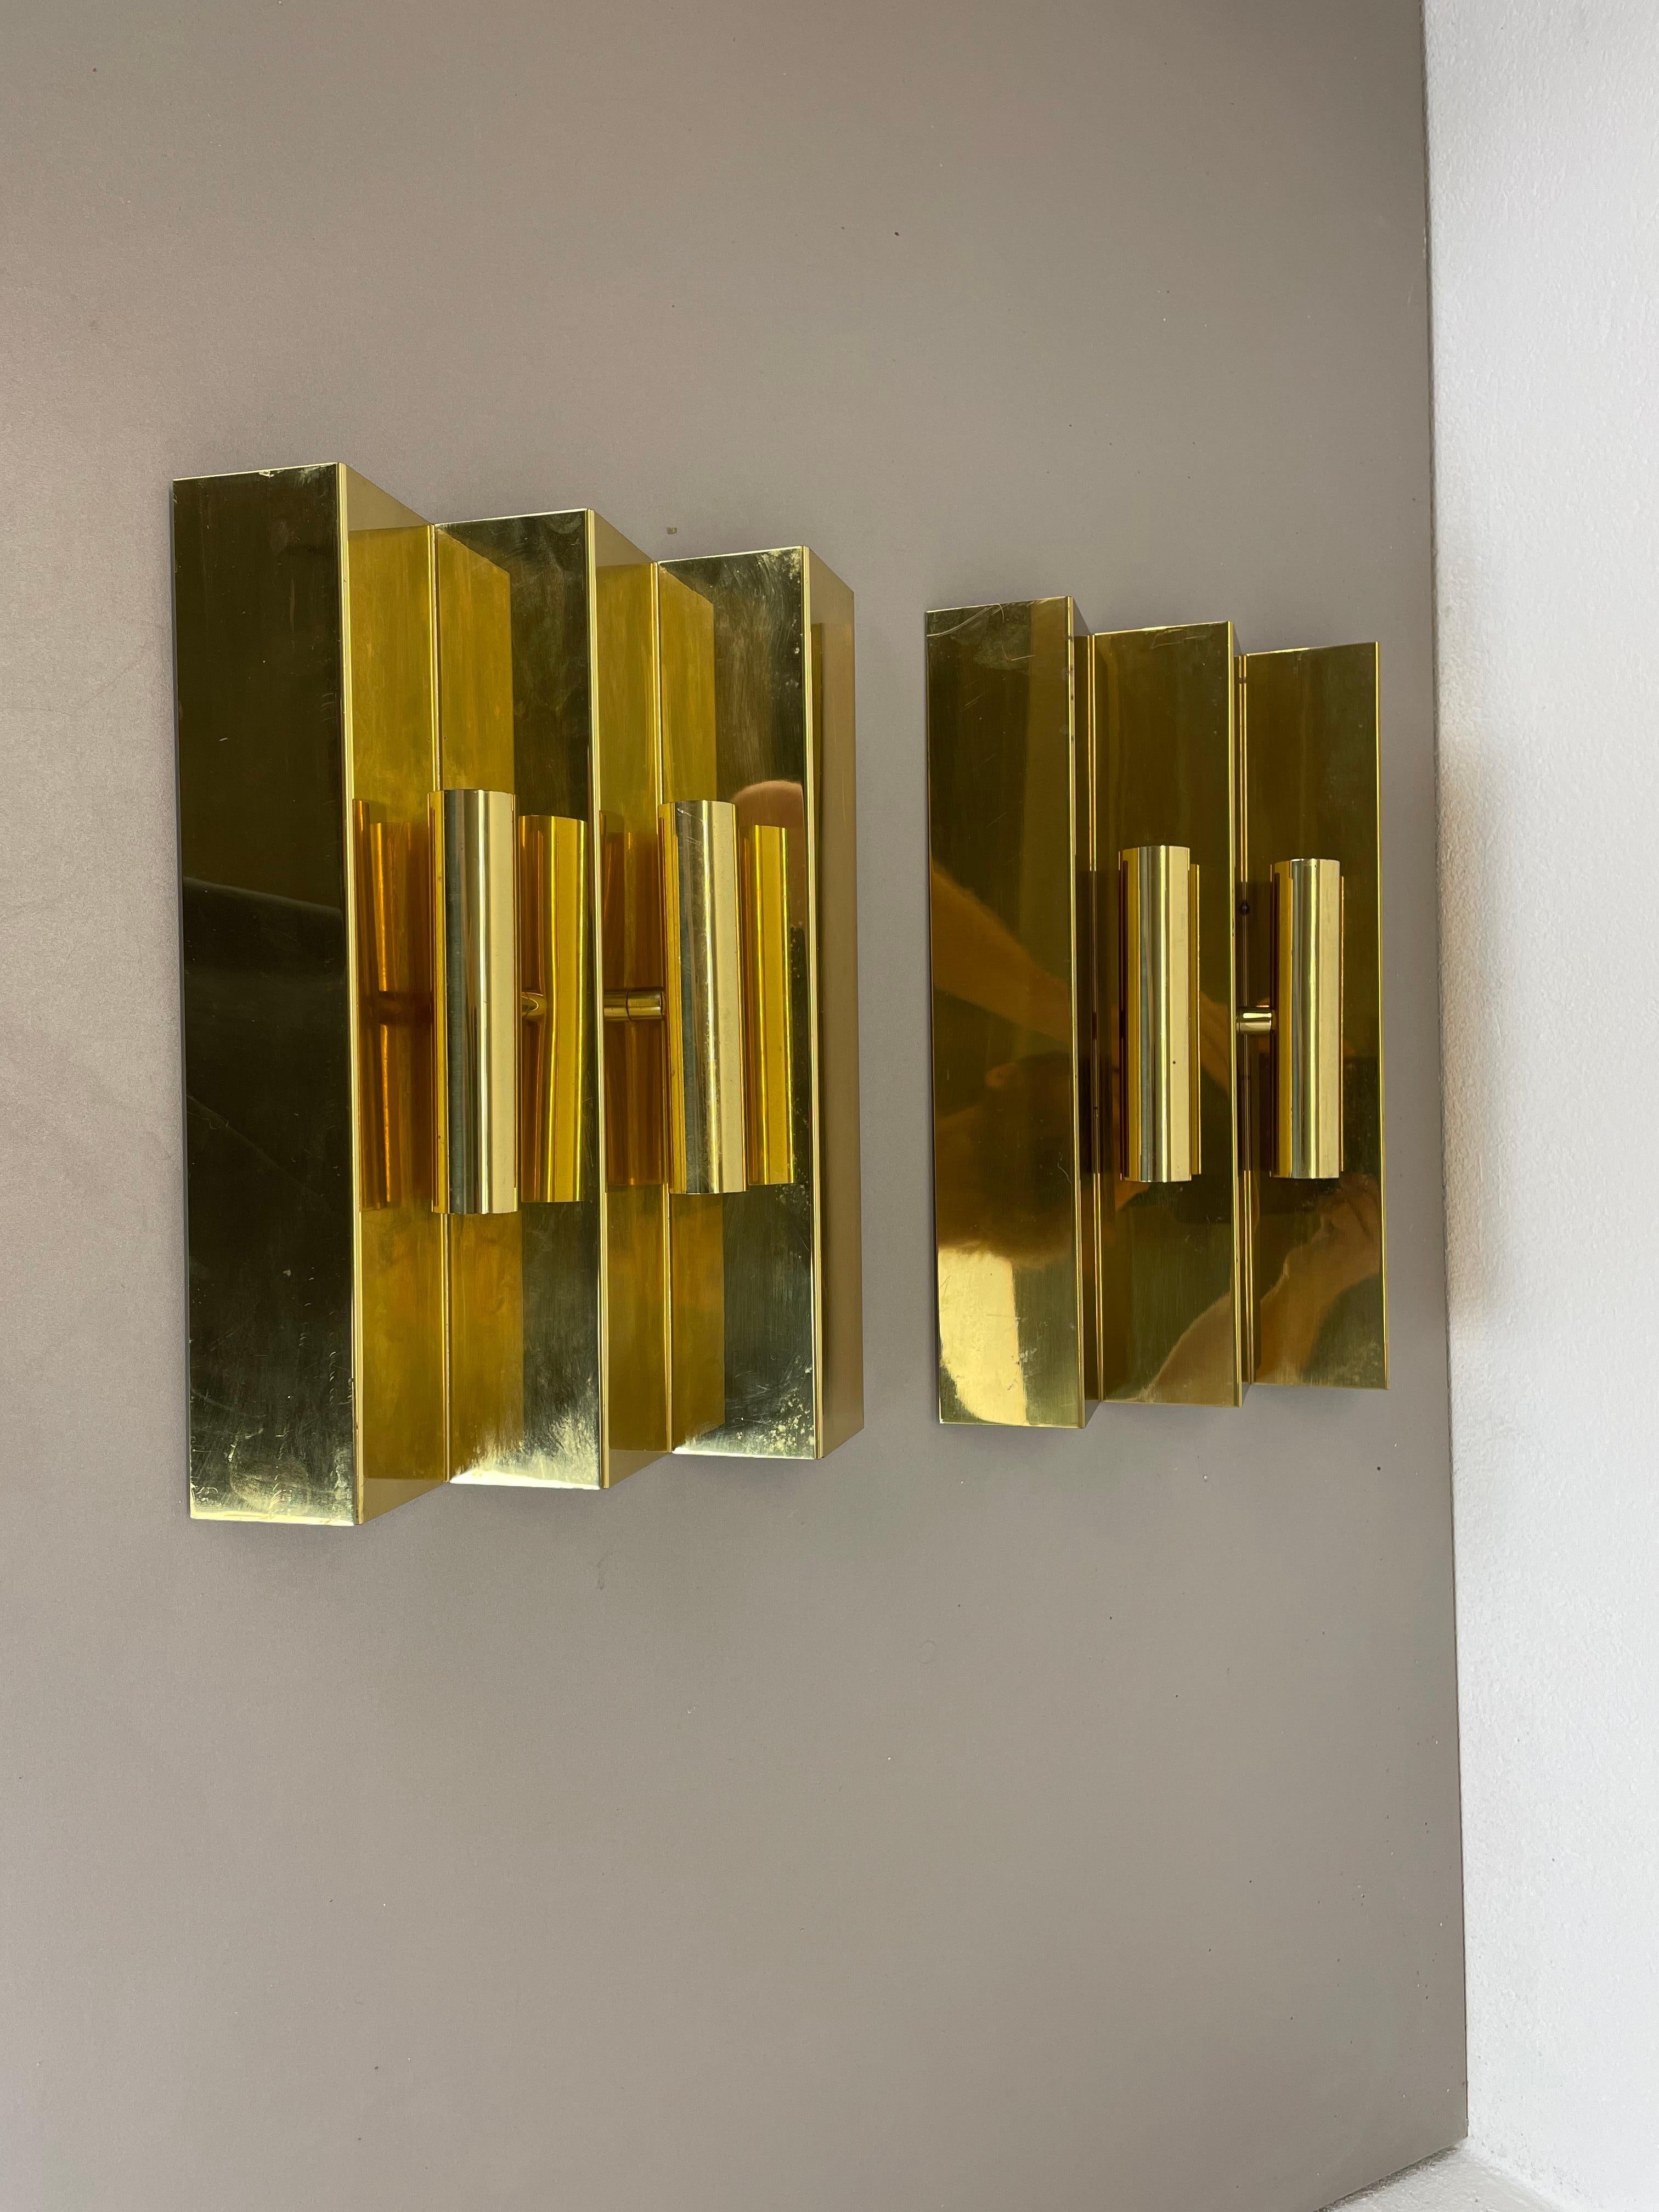 Article:

wall light set of 2



Producer: WKR Leuchten, Germany



Origin: Germany in the manner of Stilnovo and Sciolari



Age:

1970s



This modernist light set was produced in Germany in the 1970s by WKR Leuchten. It is made from solid brass